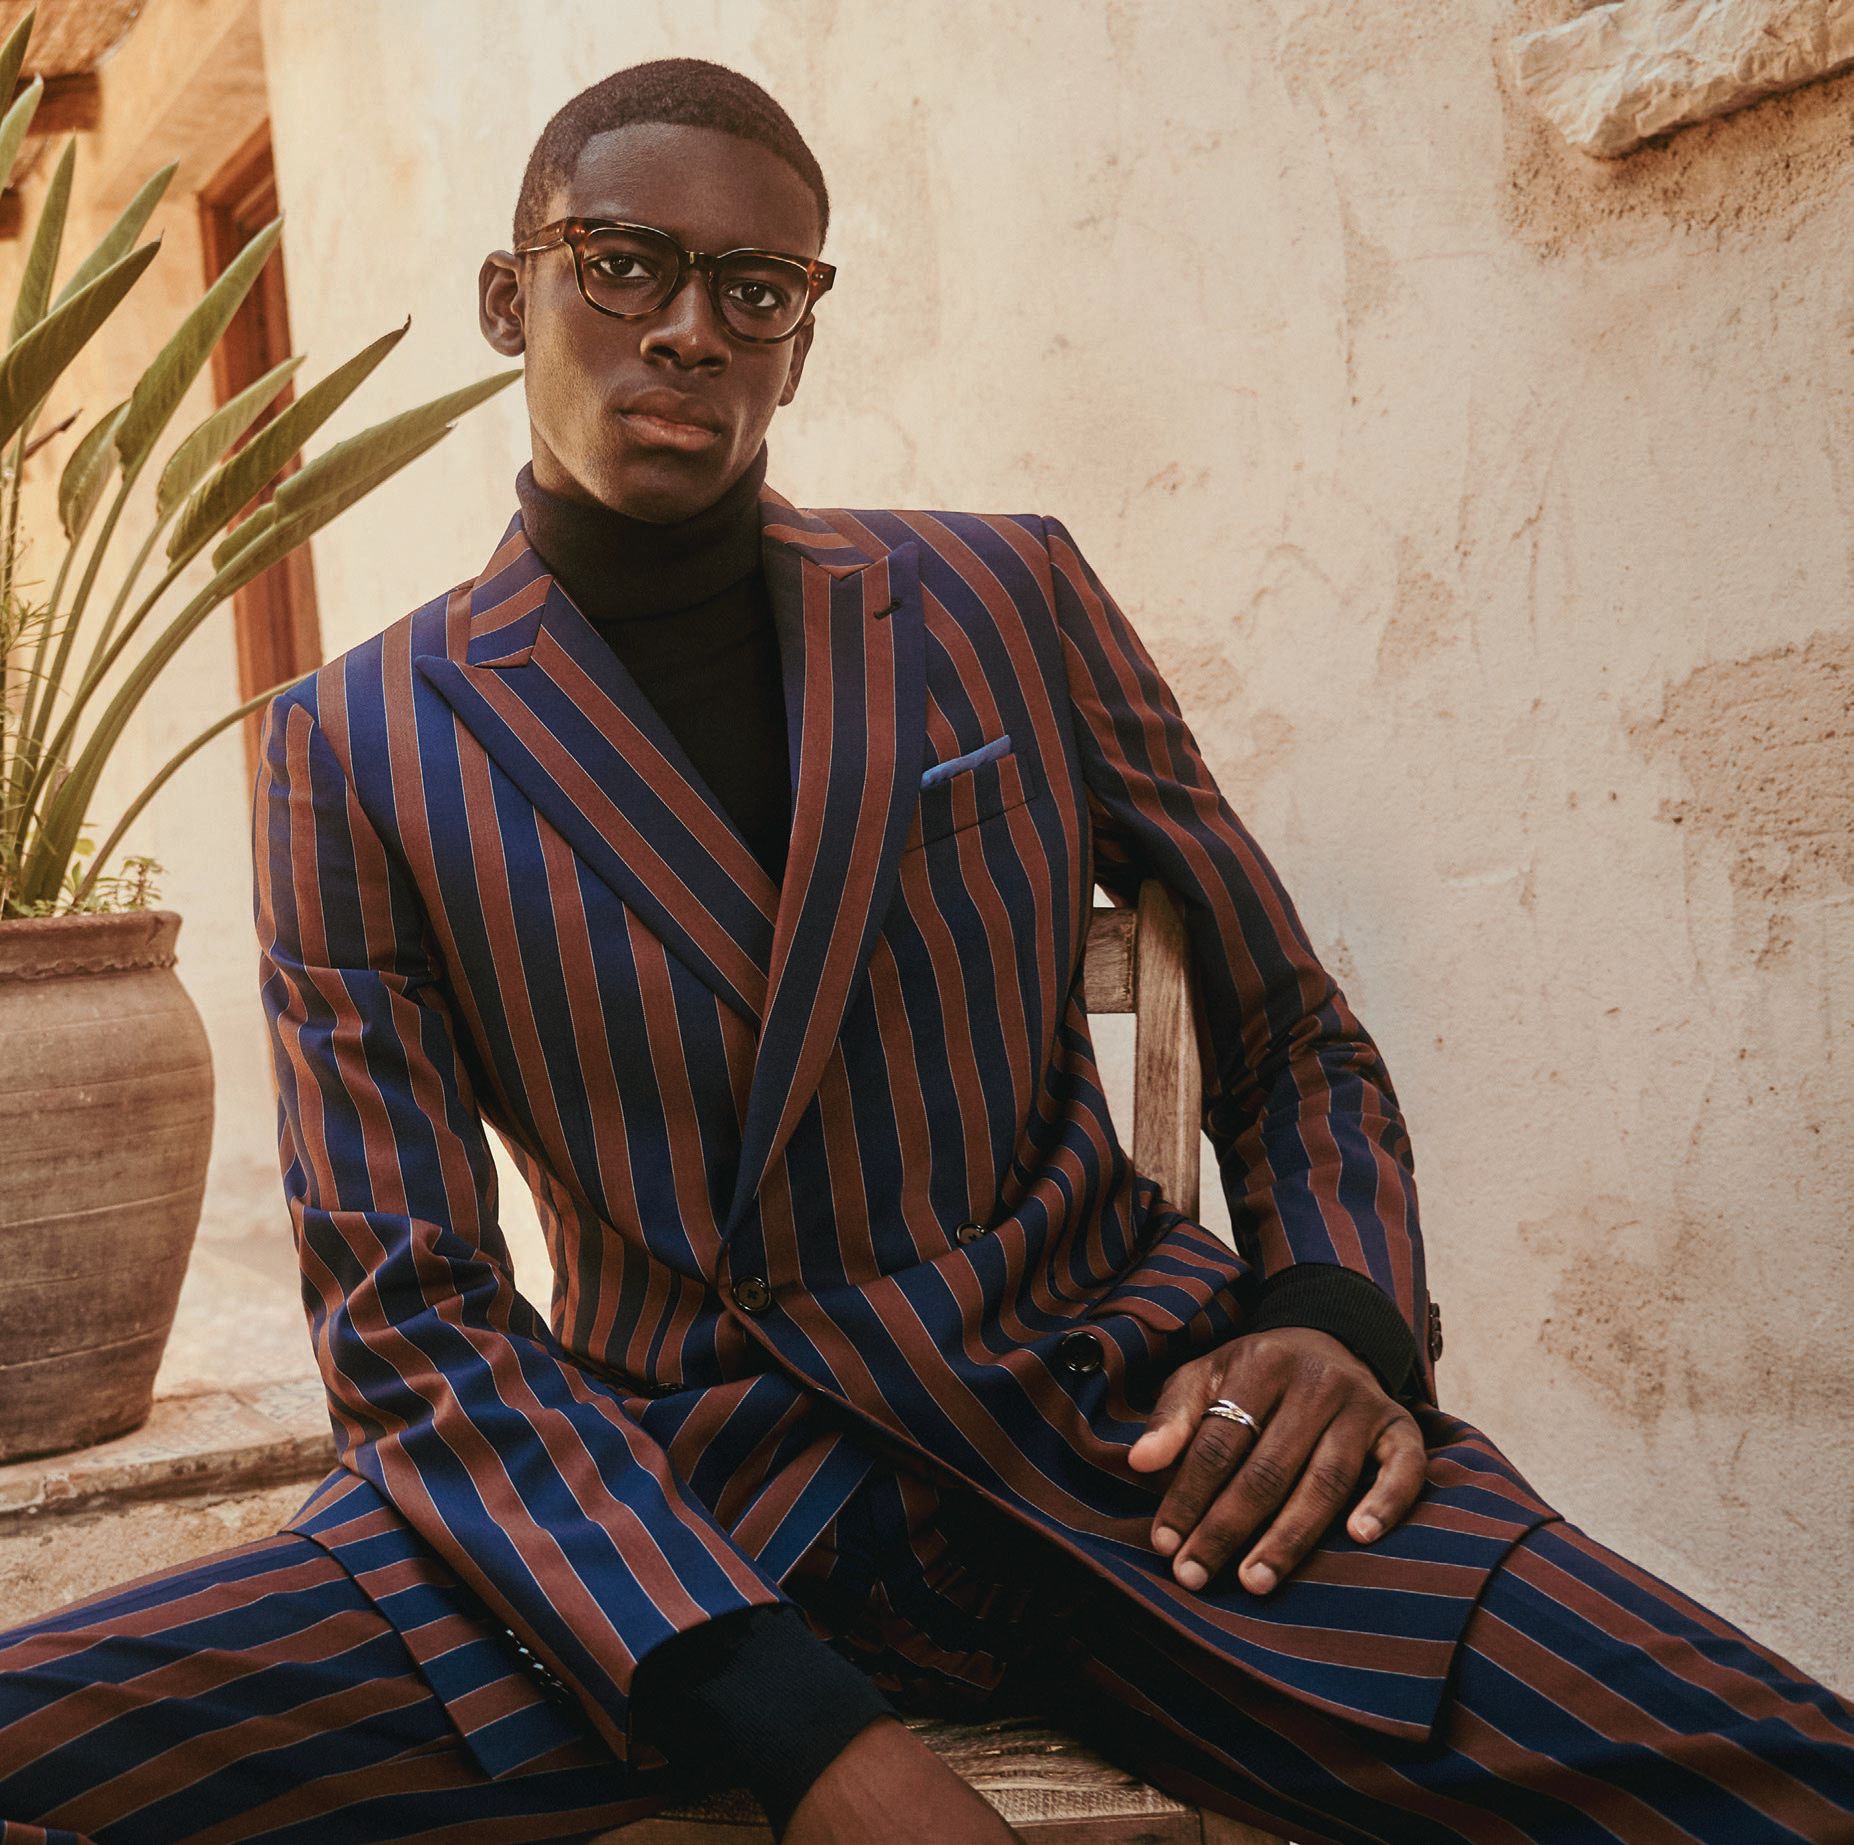 The Java Stripe jacket is from Indochino’s fall line. PHOTO COURTESY OF INDOCHINO